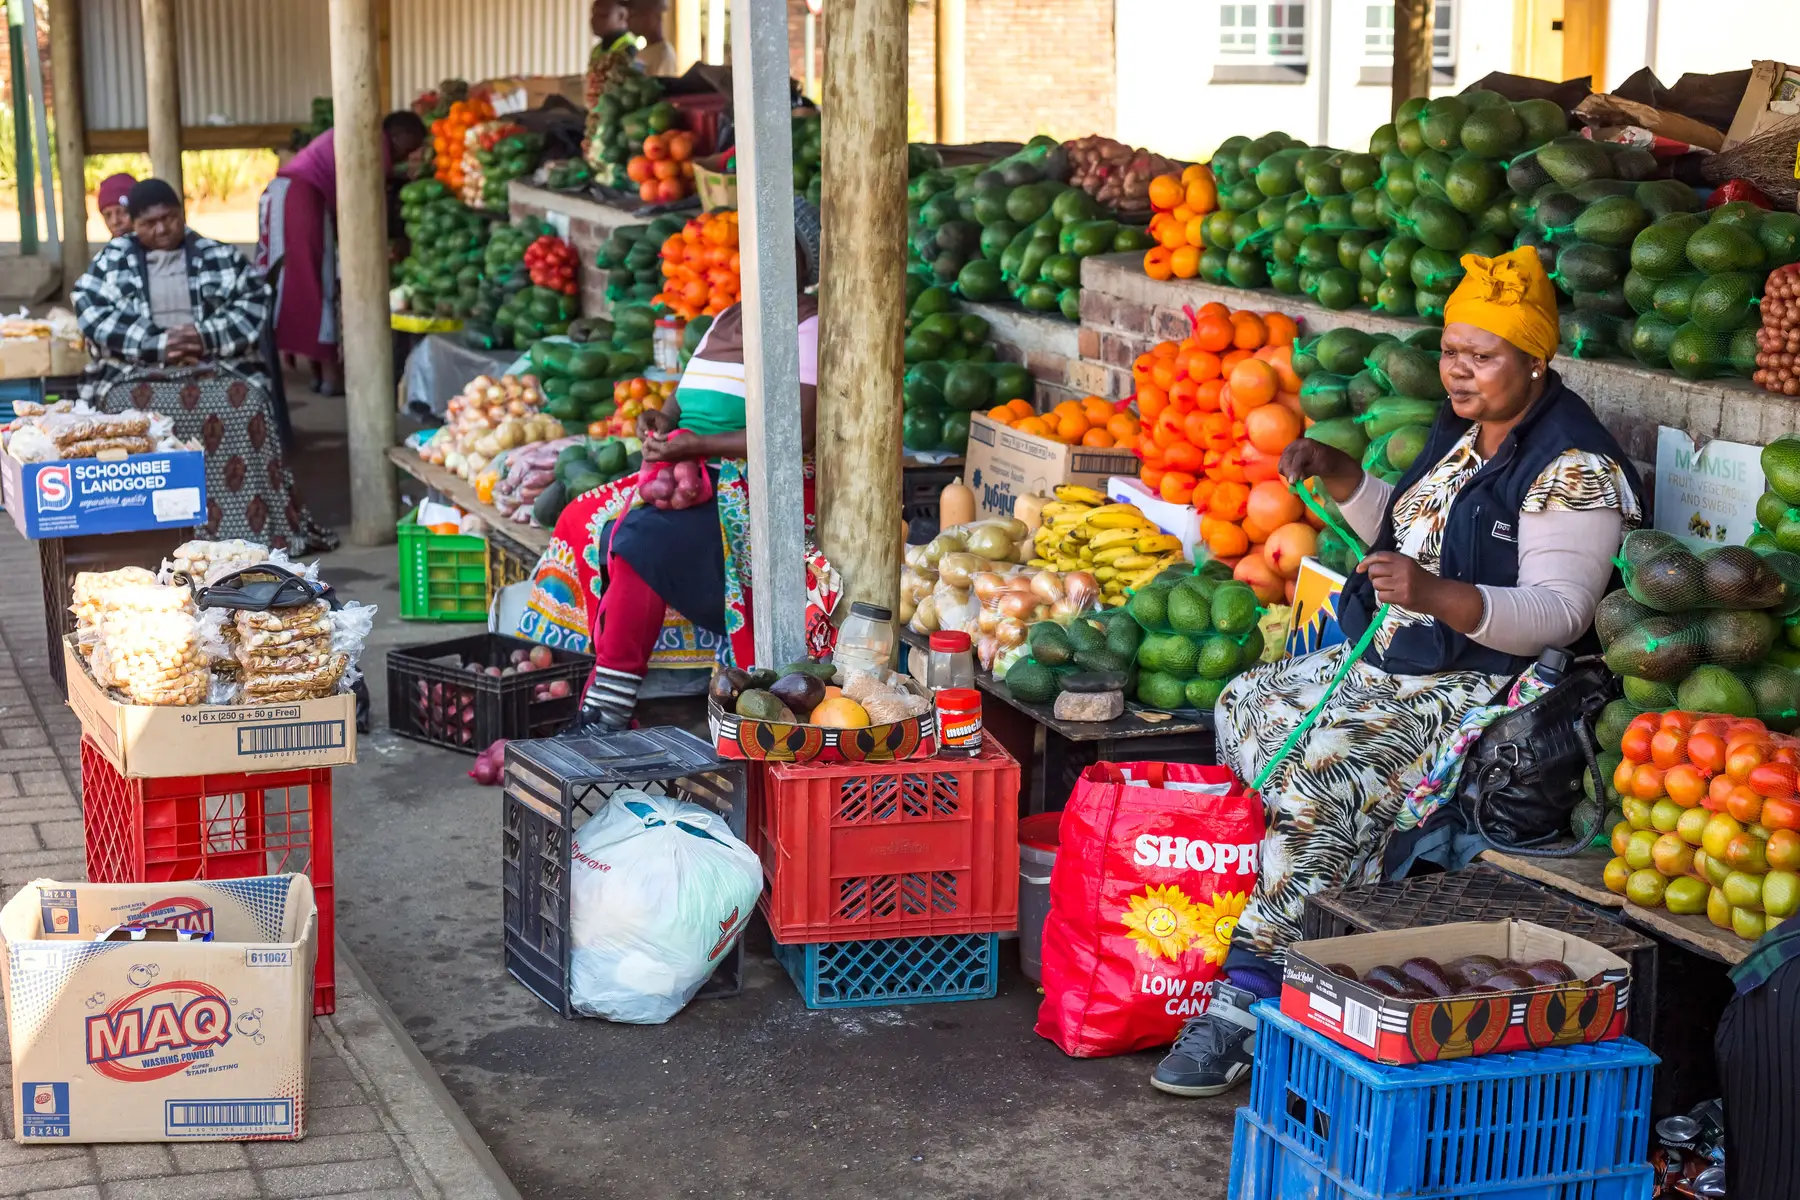 Fruit sellers in South Africa